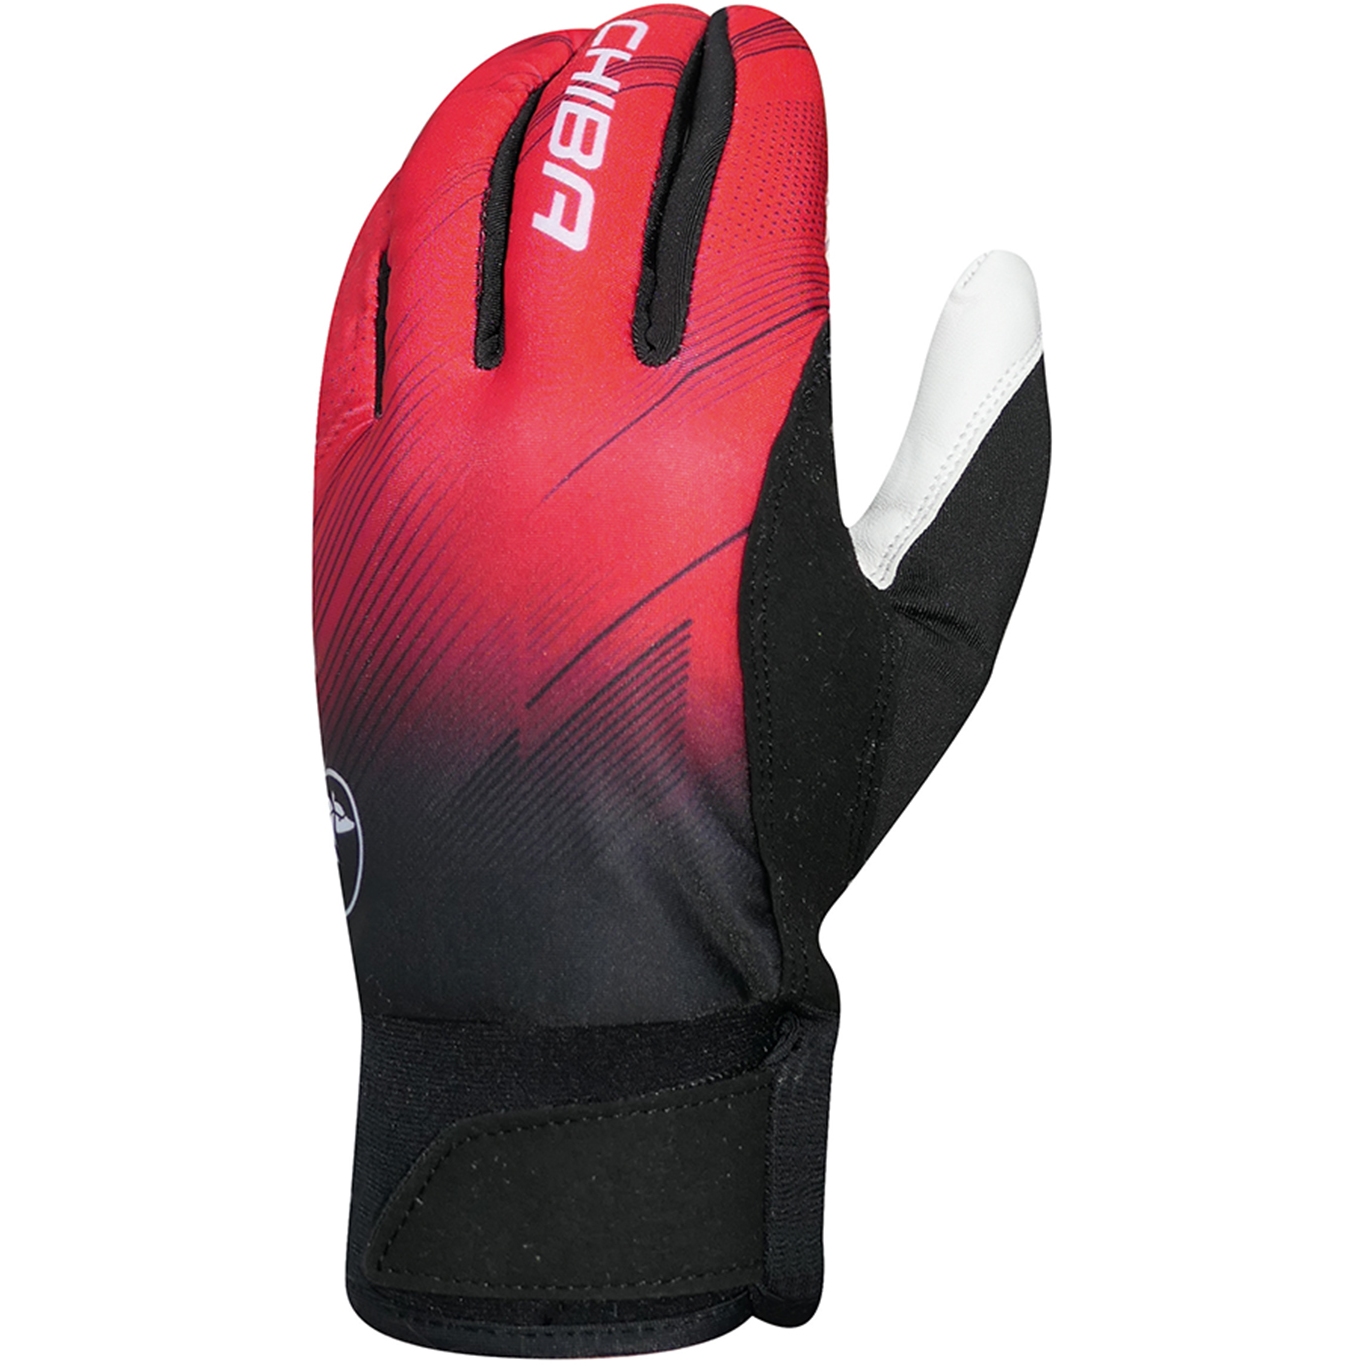 Picture of Chiba Nordic Pro Warm Ski Gloves - red